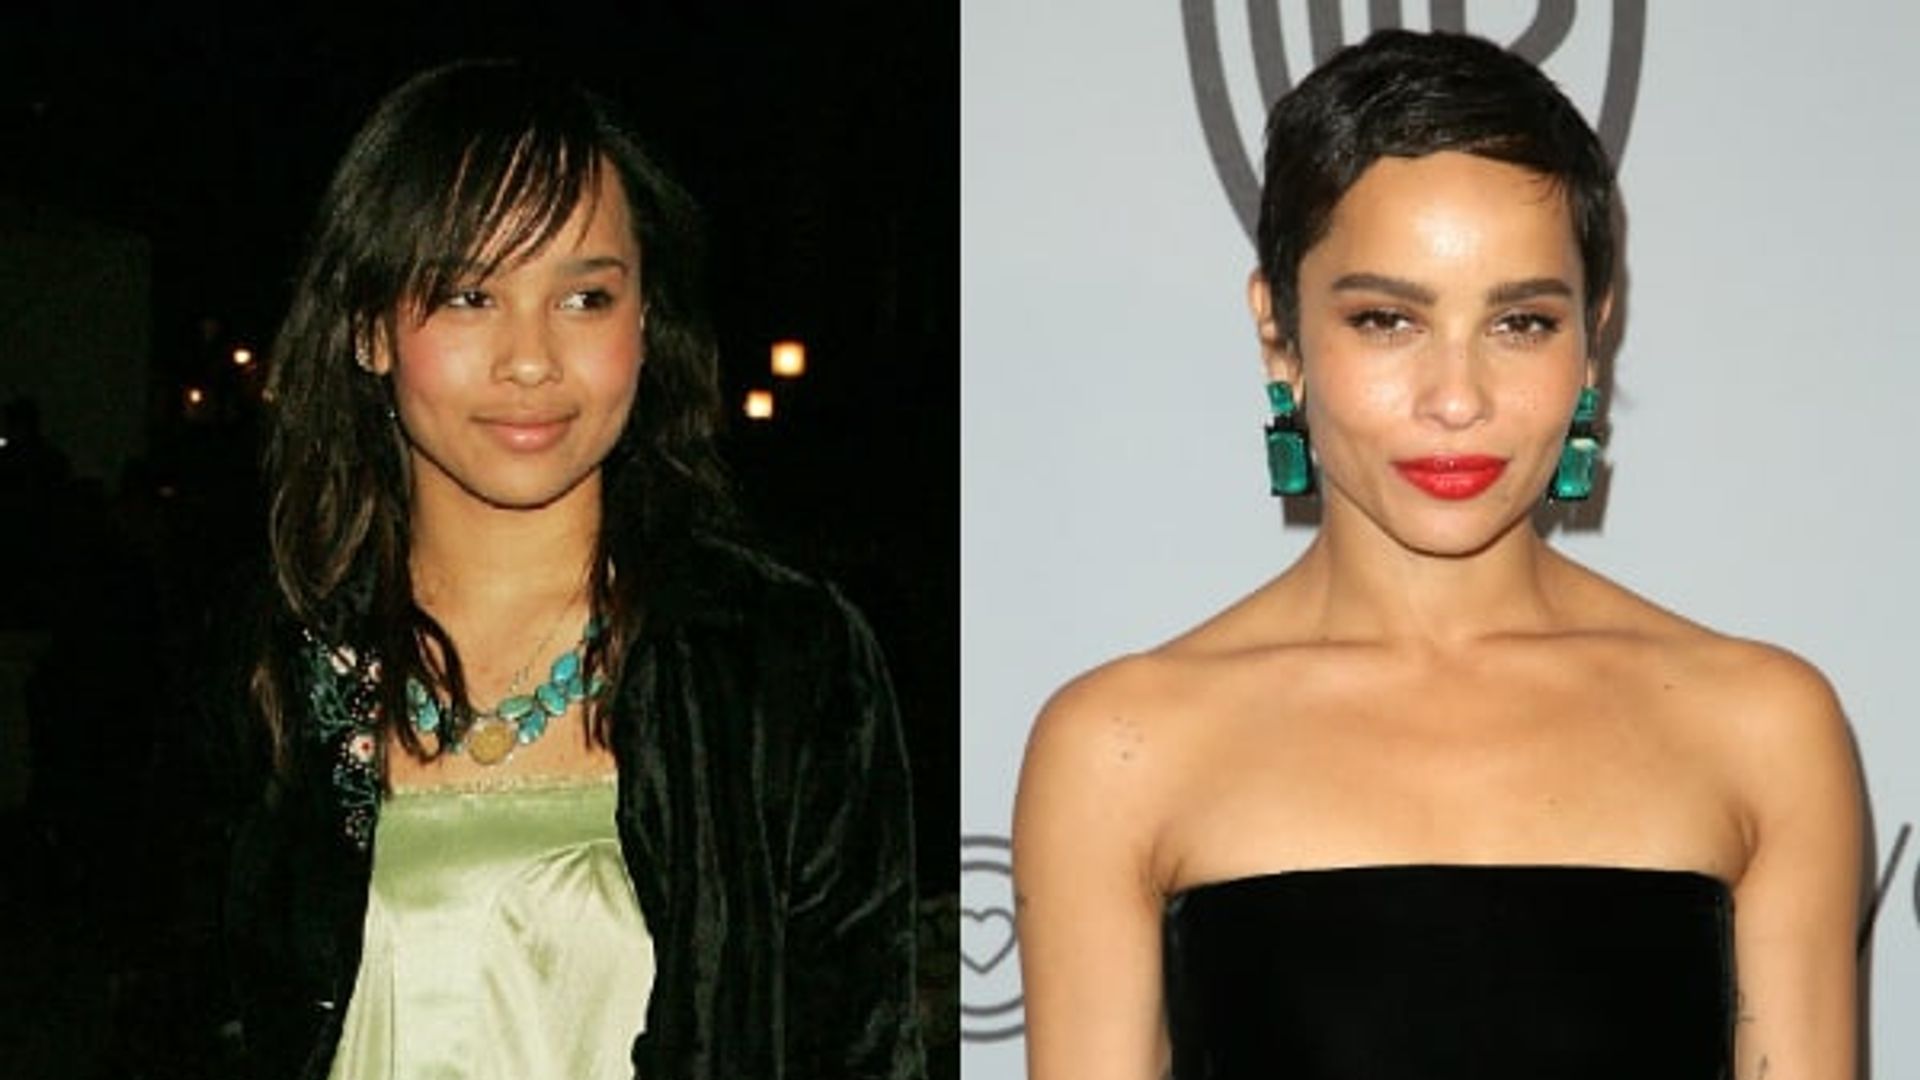 Zoë Kravitz as a child and now